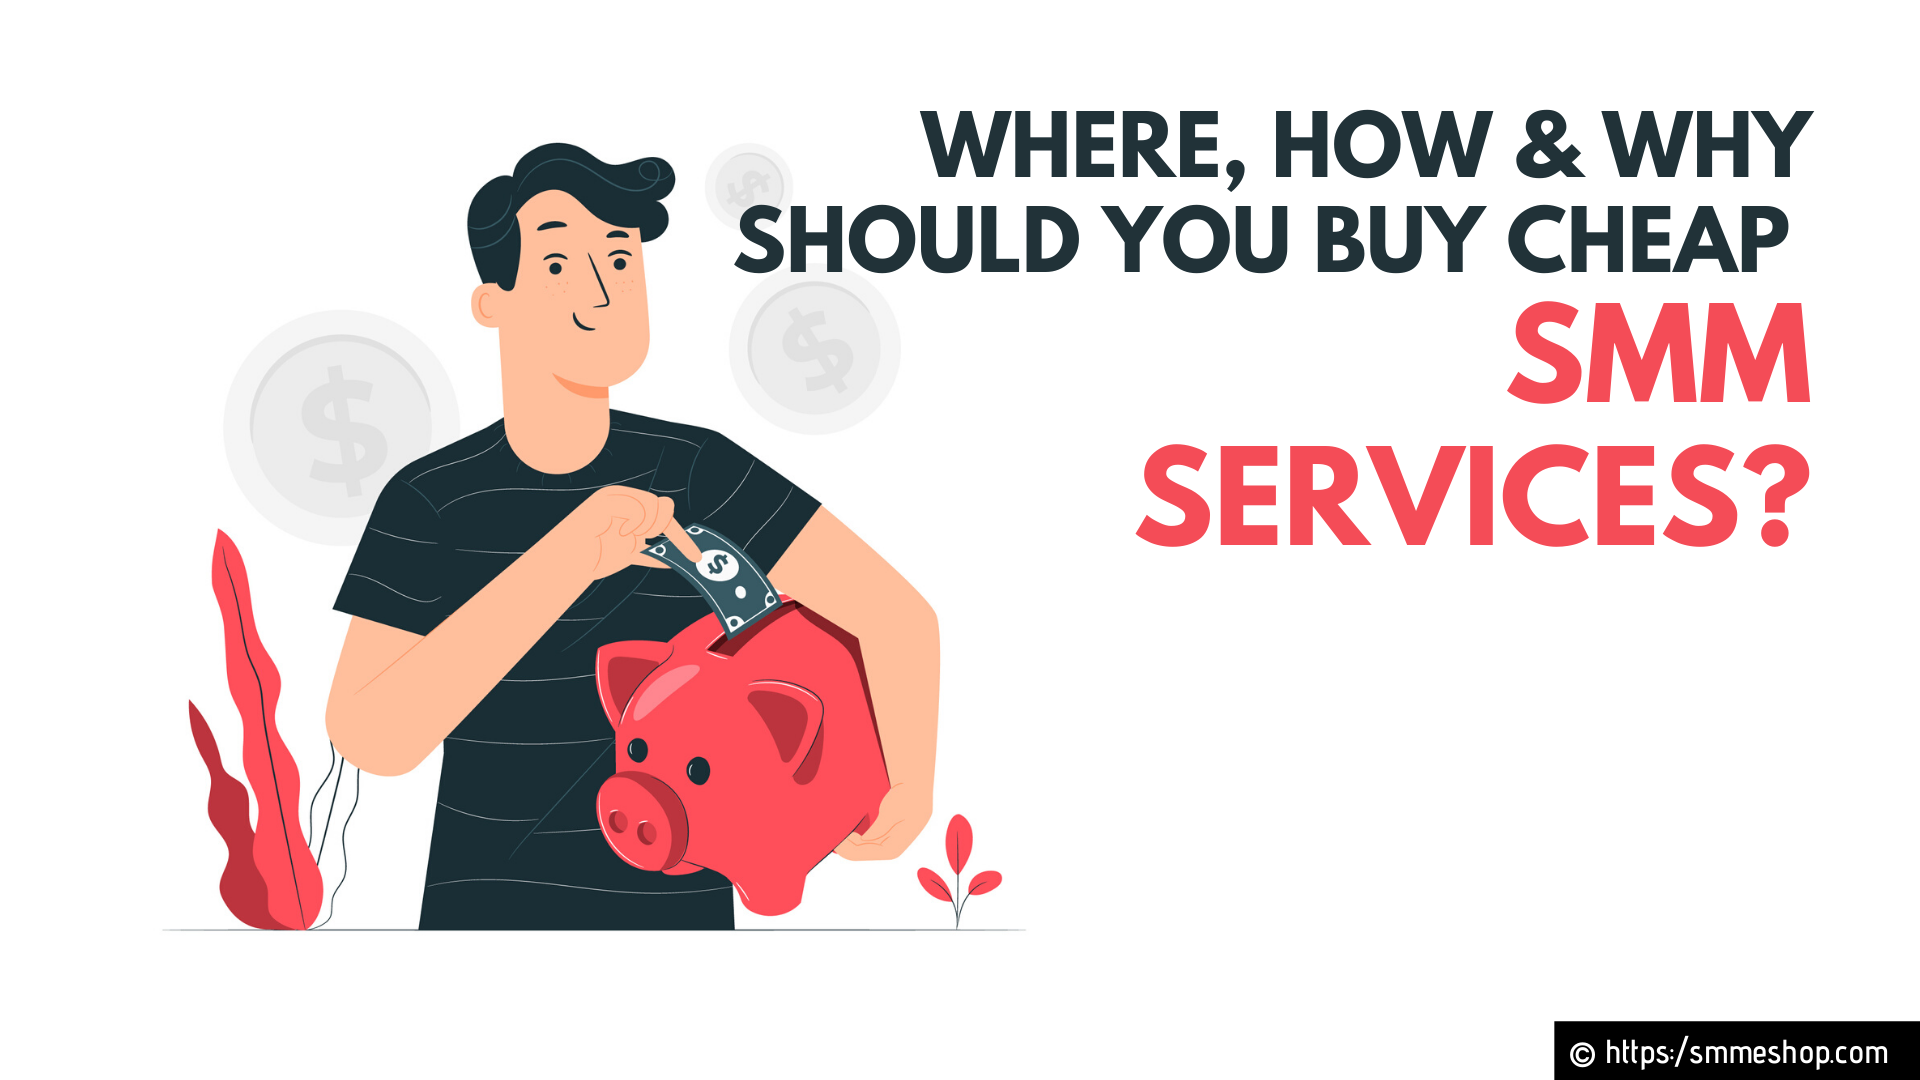 Where, How & Why should you Buy Cheap SMM Services?